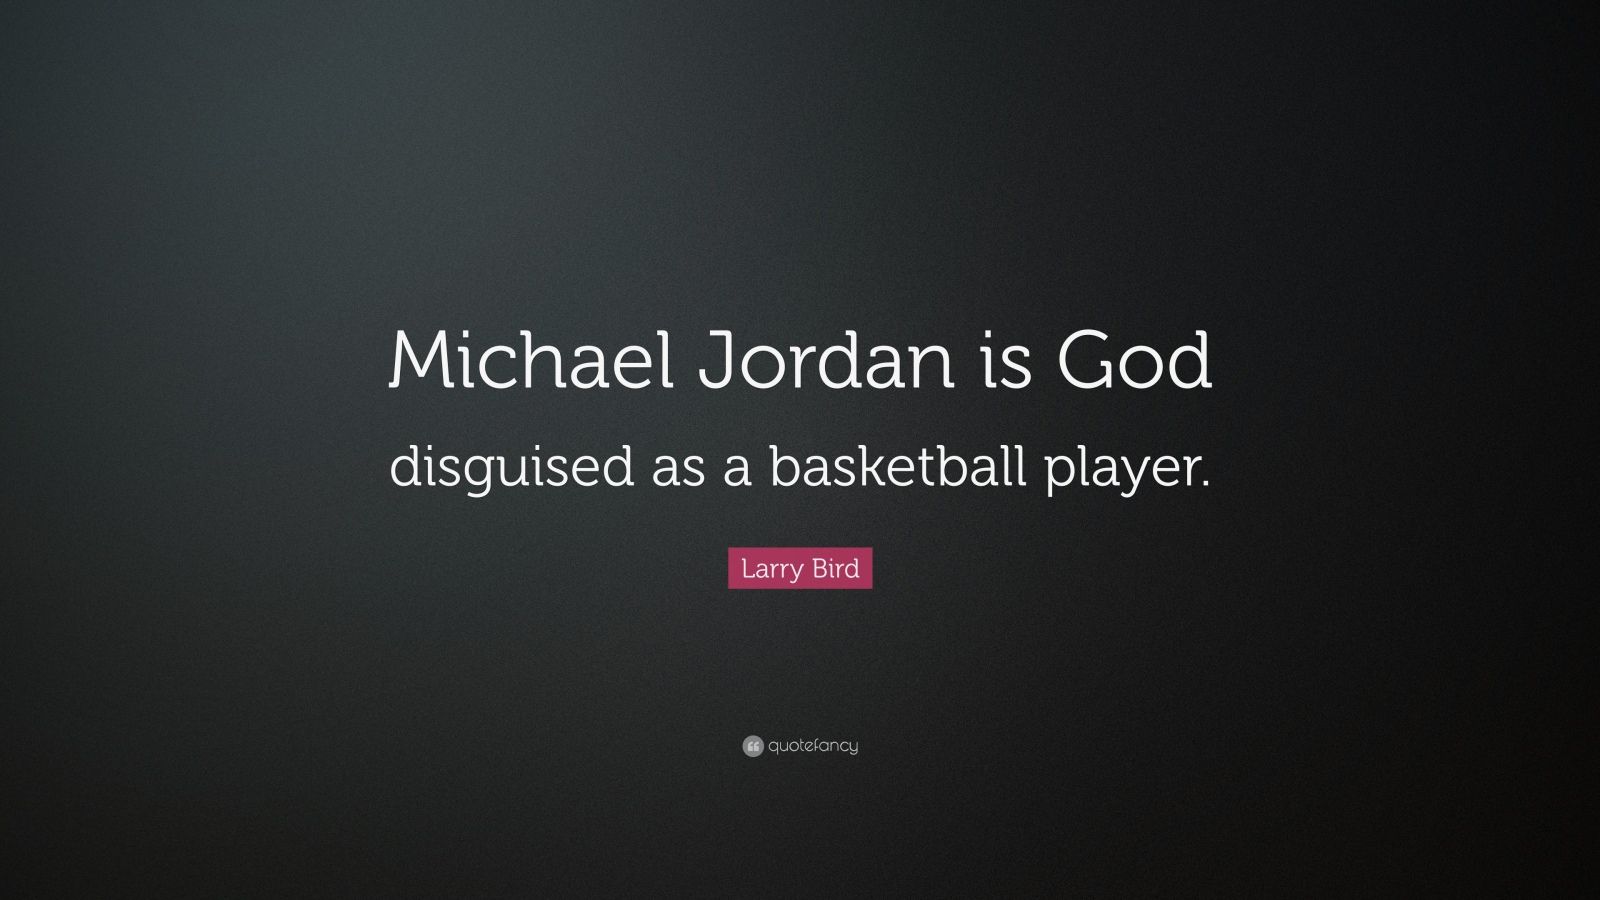 The day Larry Bird said, 'It's just God disguised as Michael Jordan